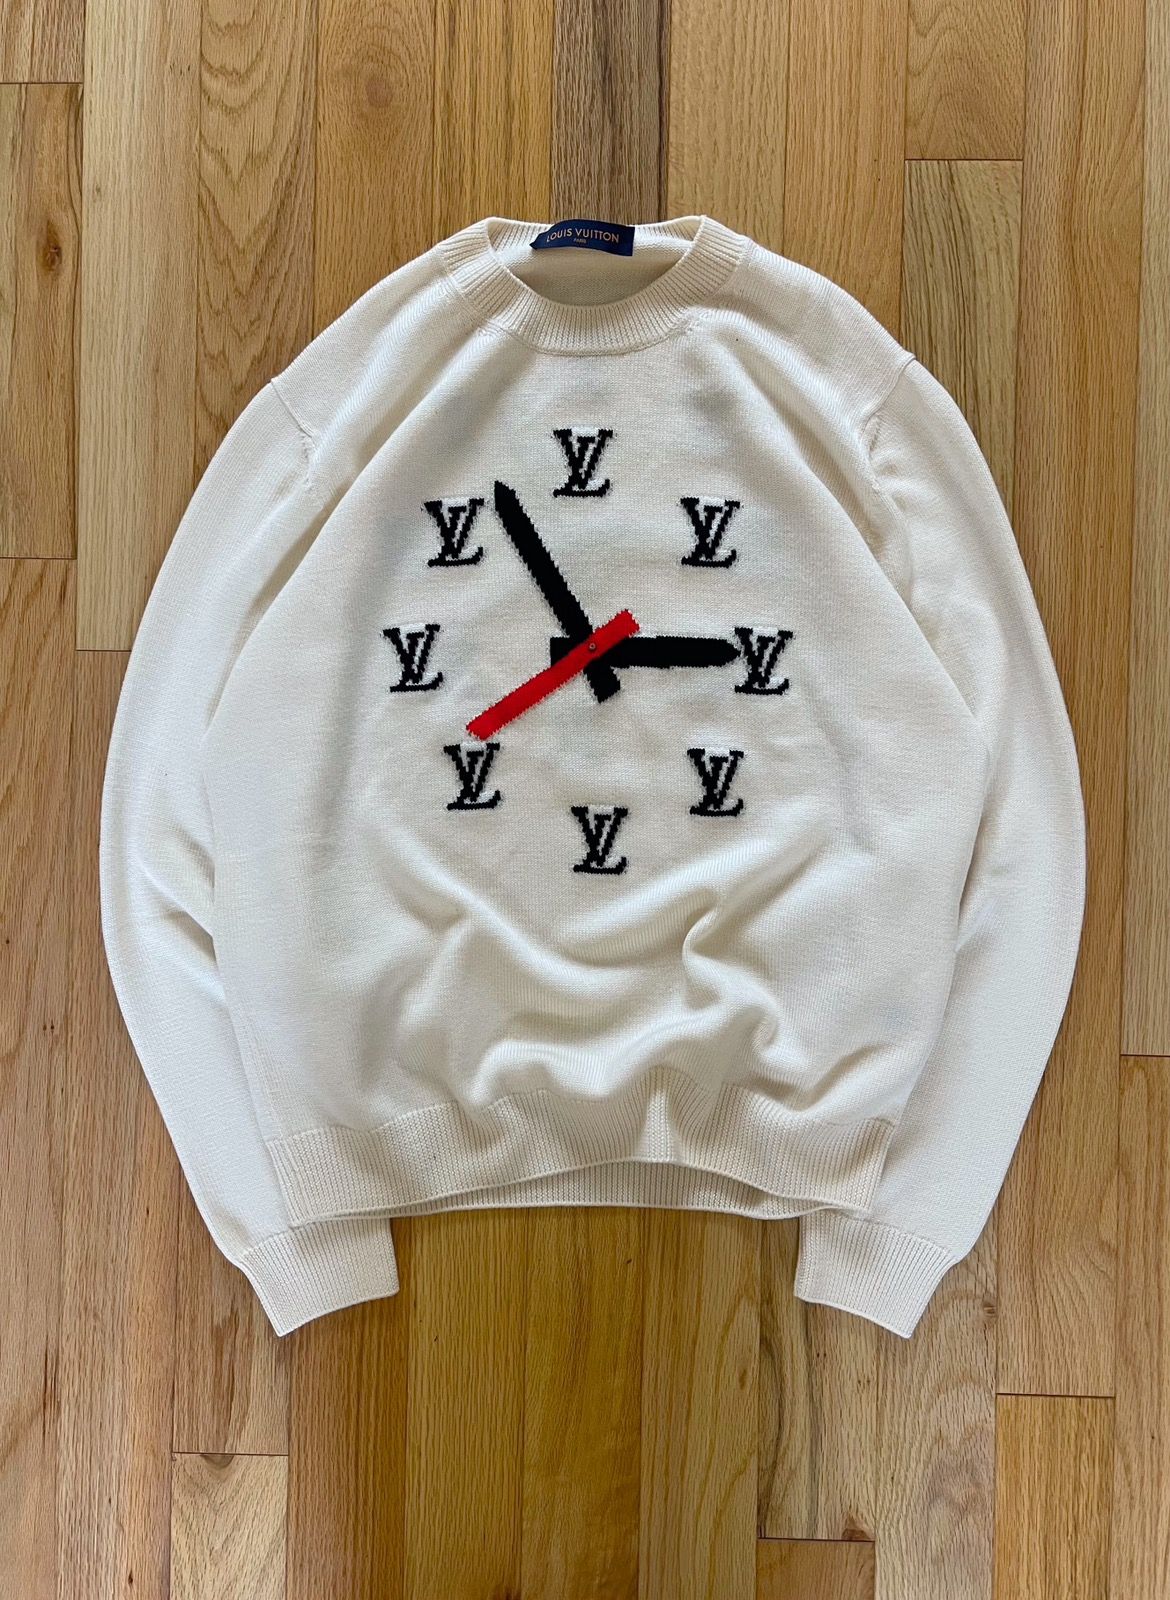 FOR SALE* SS21 Louis Vuitton by Virgil Abloh 'Clock' Intarsia Wool Knit  Sweater Virgil Abloh's Spring 2021 collection, staged in…